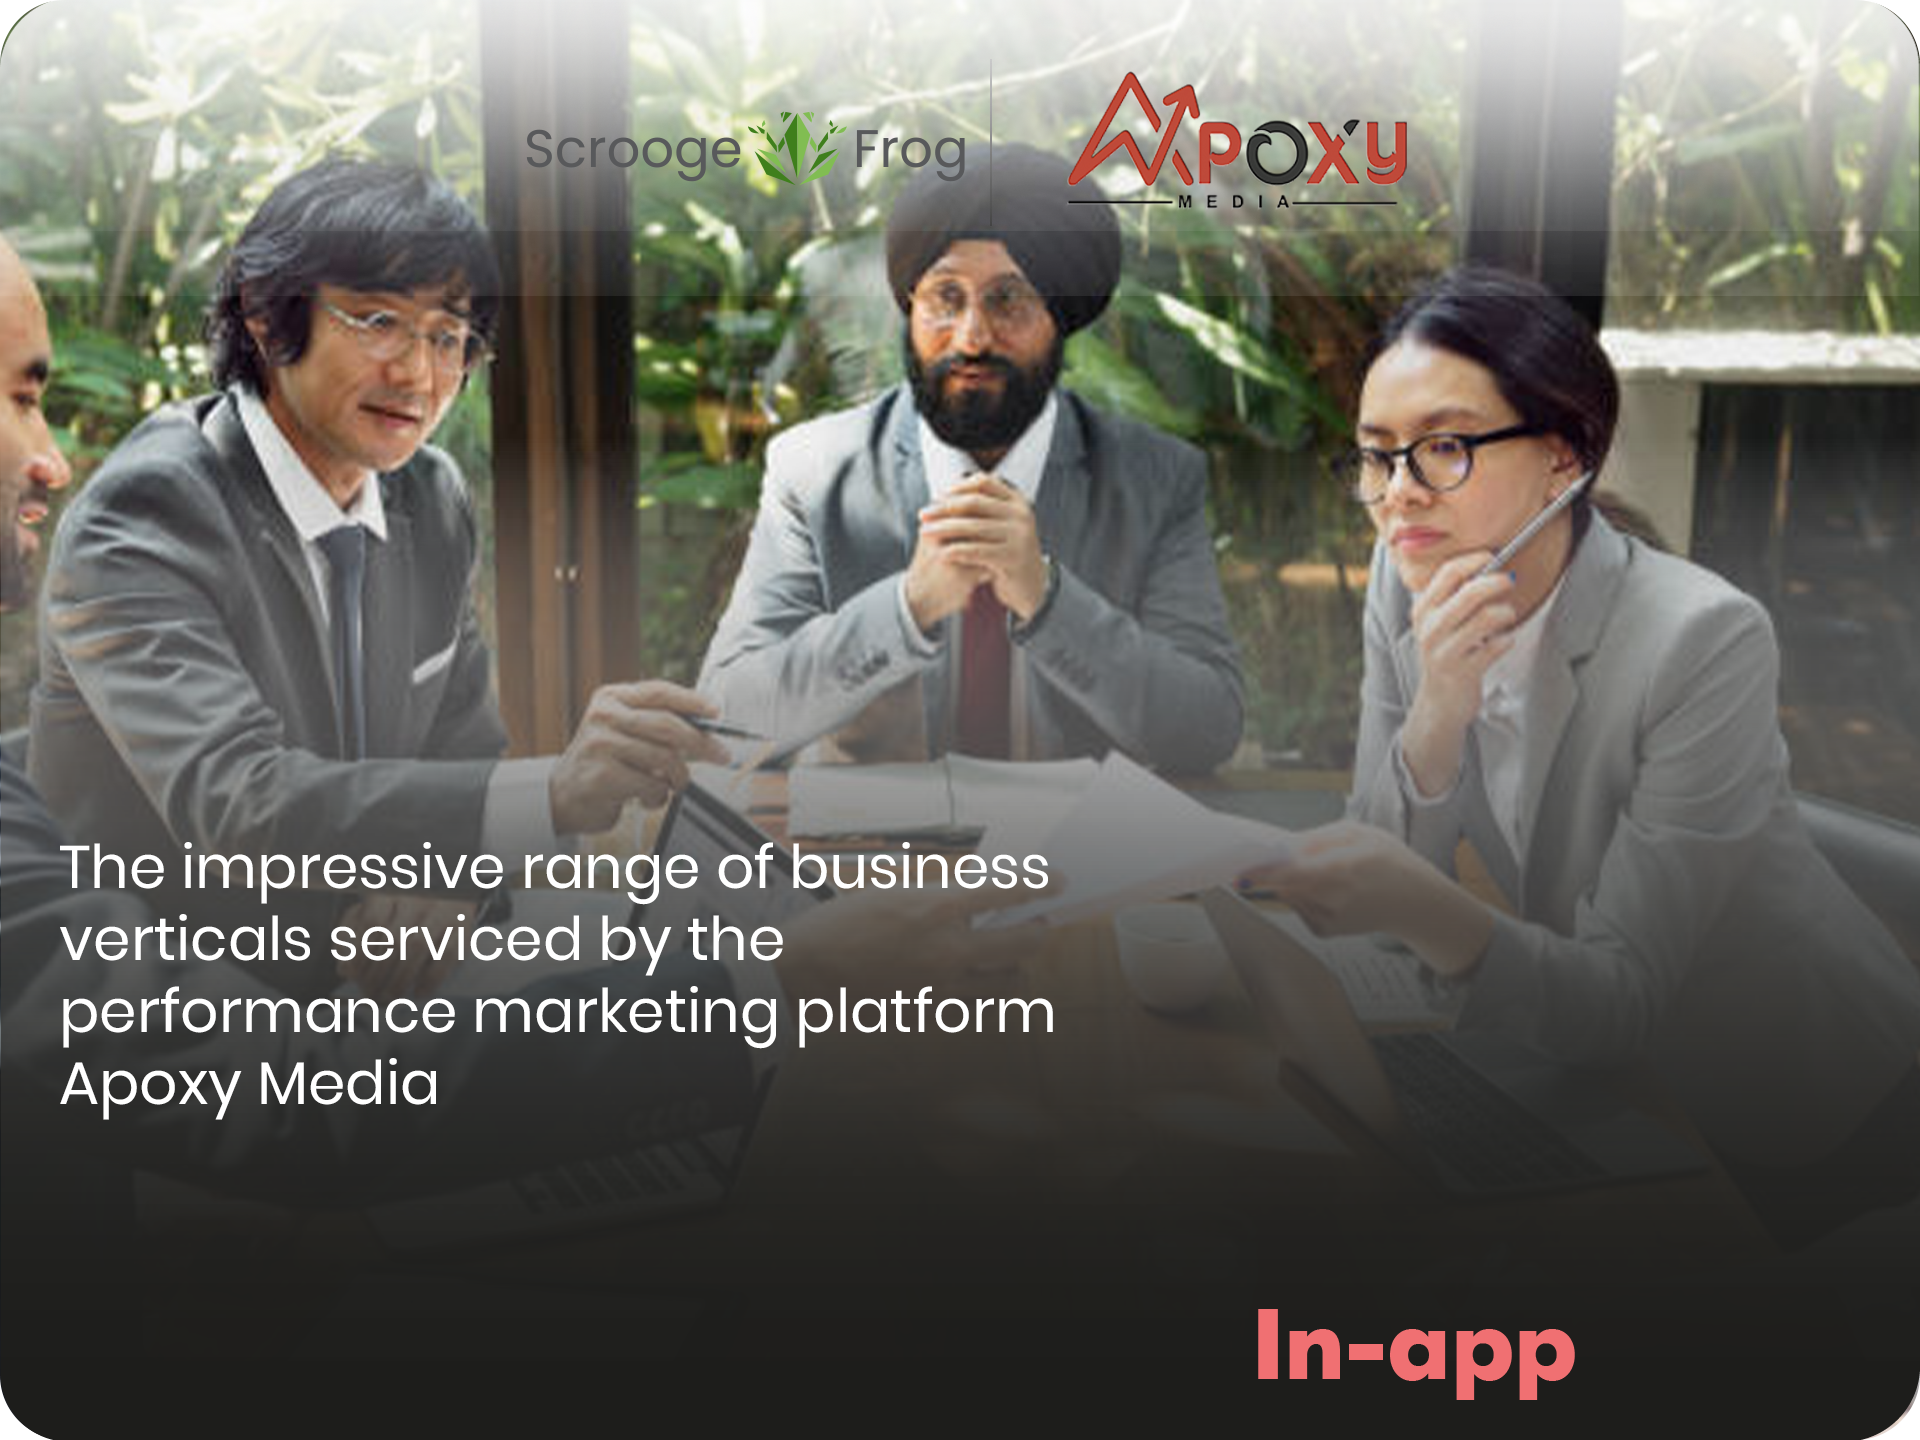 The large number of verticals with which the performance marketing platform Apoxy Media works is impressive